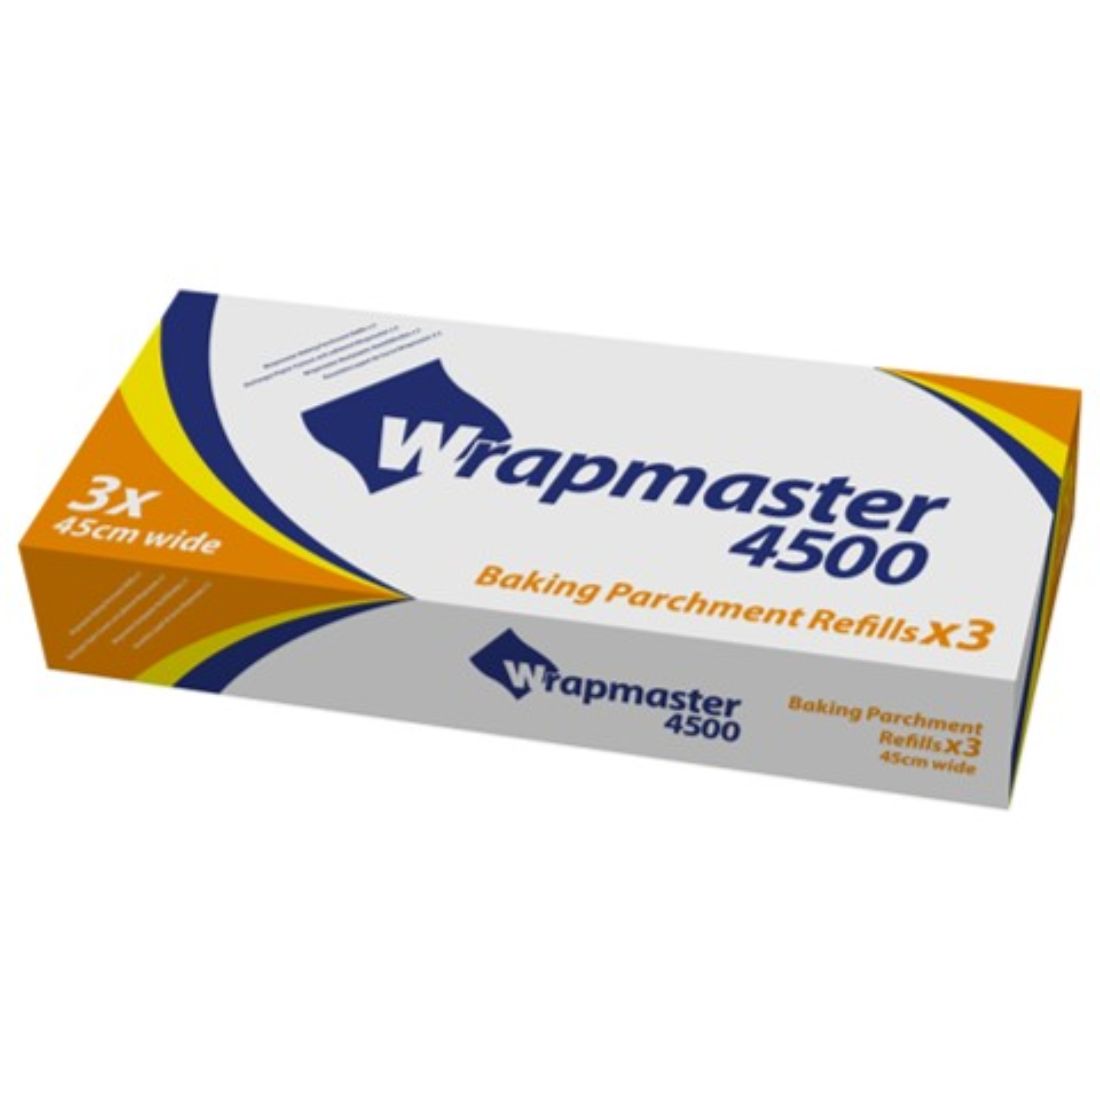 Wrapmaster 4500 Baking Parchment Refill Rolls - 45cm x 50m - Caterclean  Supplies